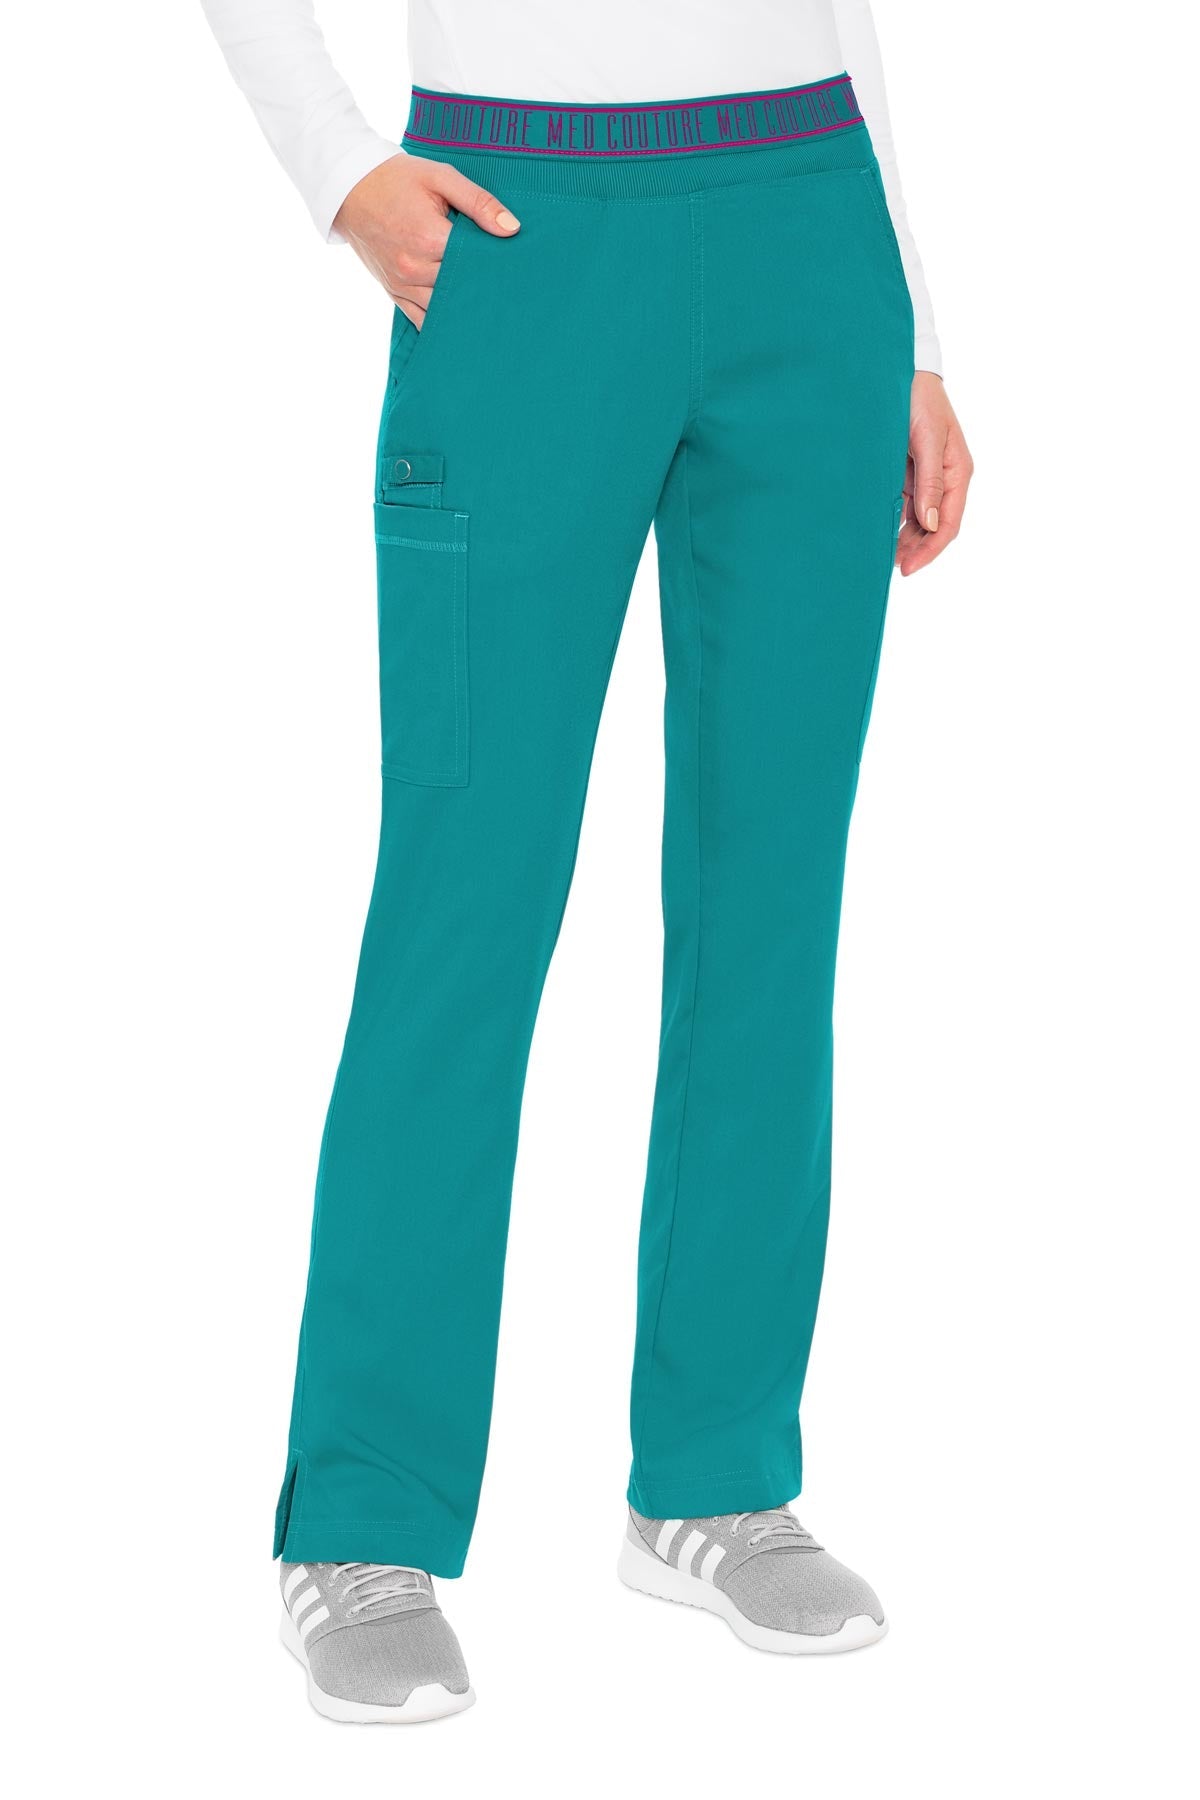 Med Couture Touch 7725 Women's Yoga 2 Cargo Pant – Valley West Uniforms